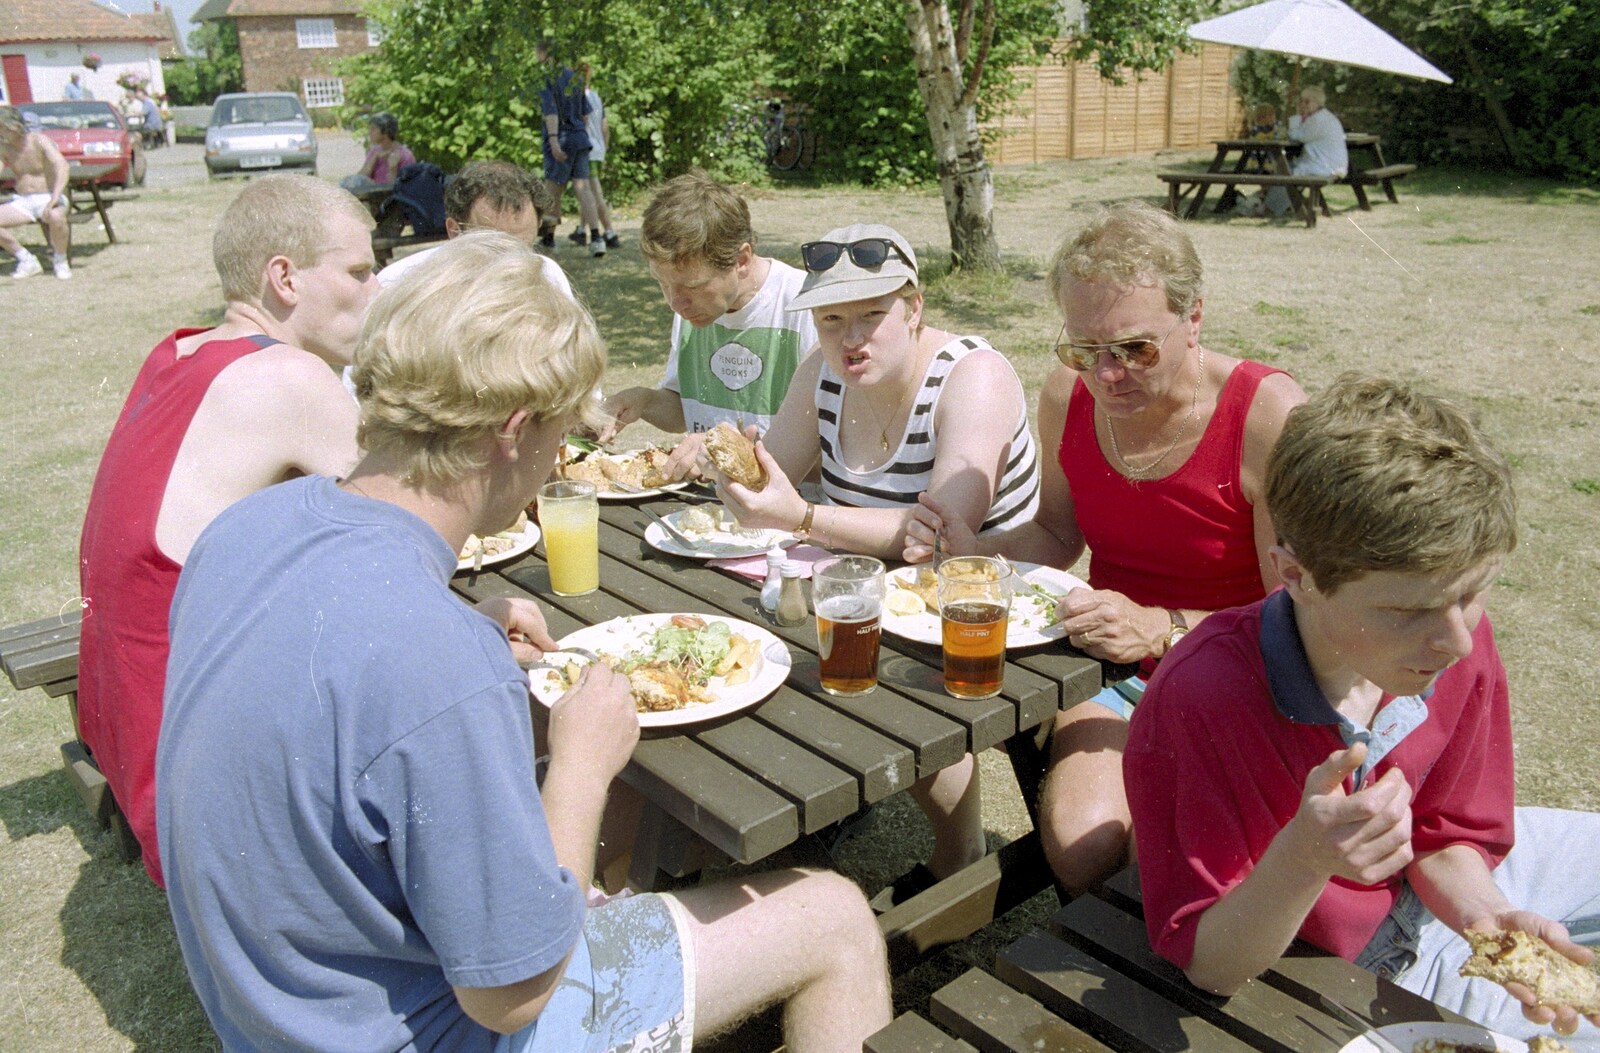 Sally gives it some from The First BSCC Bike Ride to Southwold, Suffolk - 10th June 1996